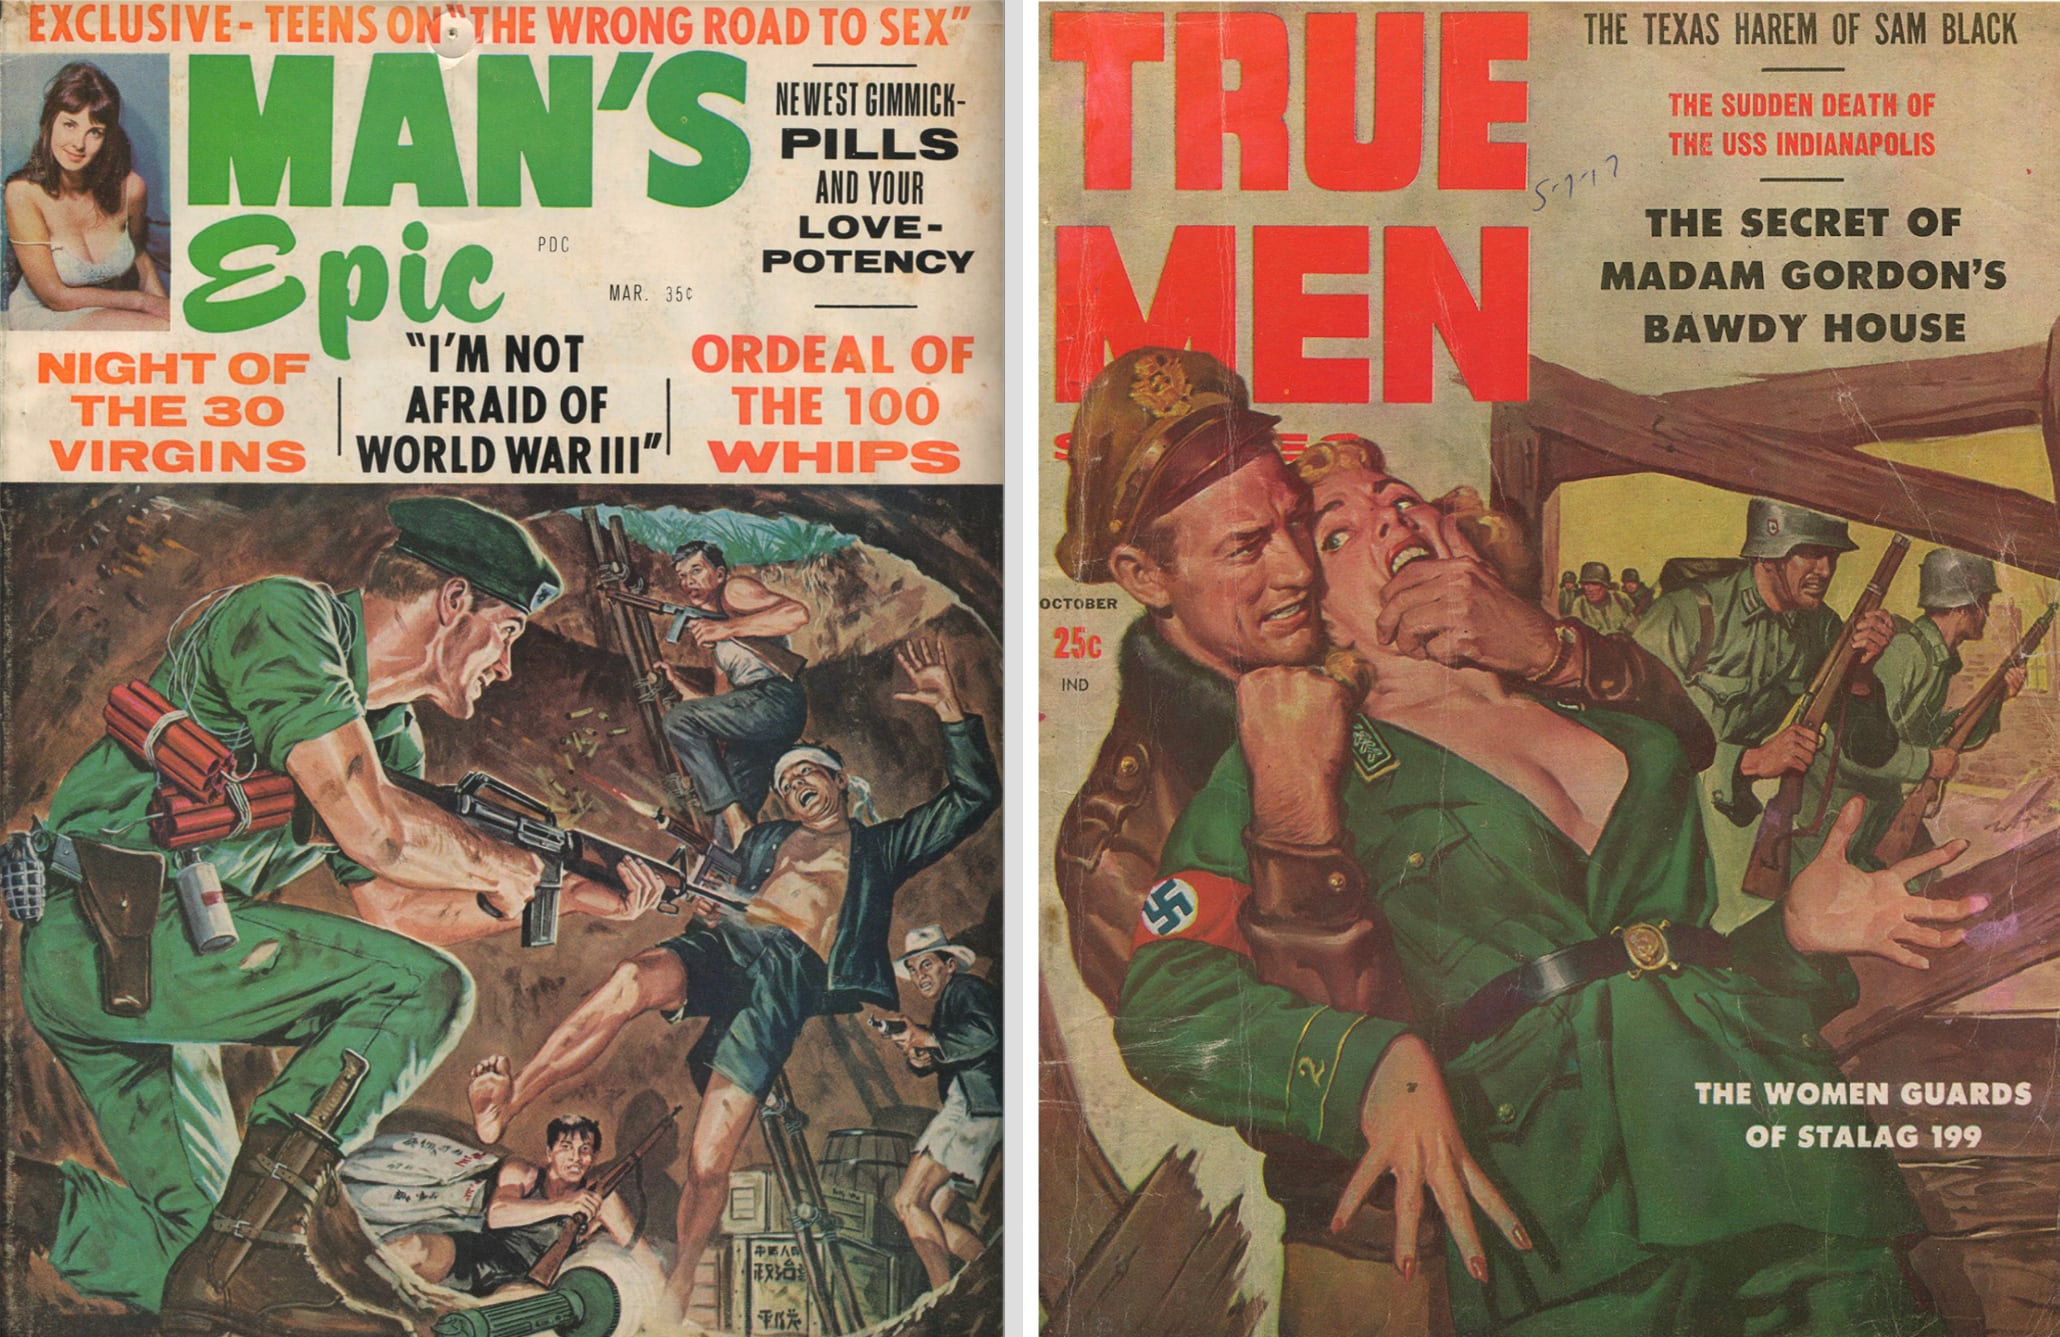 Vietnam War Sex Porn - War, heroism and sex: Pulp magazines & the messages they perpetuated